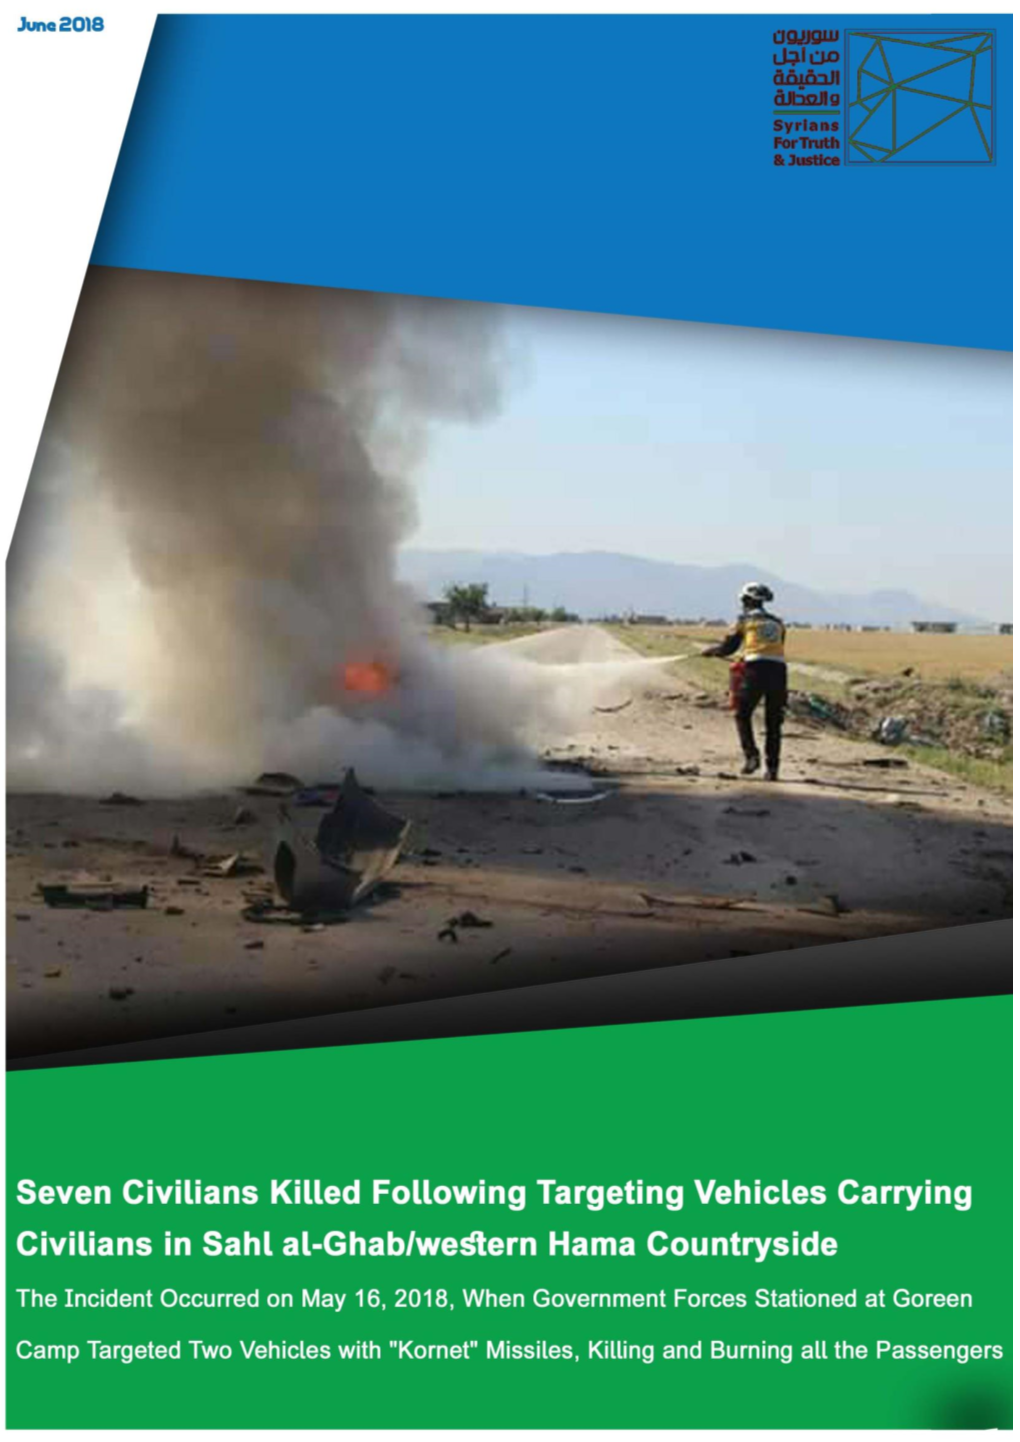 Seven Civilians Killed Following Targeting Vehicles Carrying Civilians in Sahl Al-Ghab/Western Hama Countryside